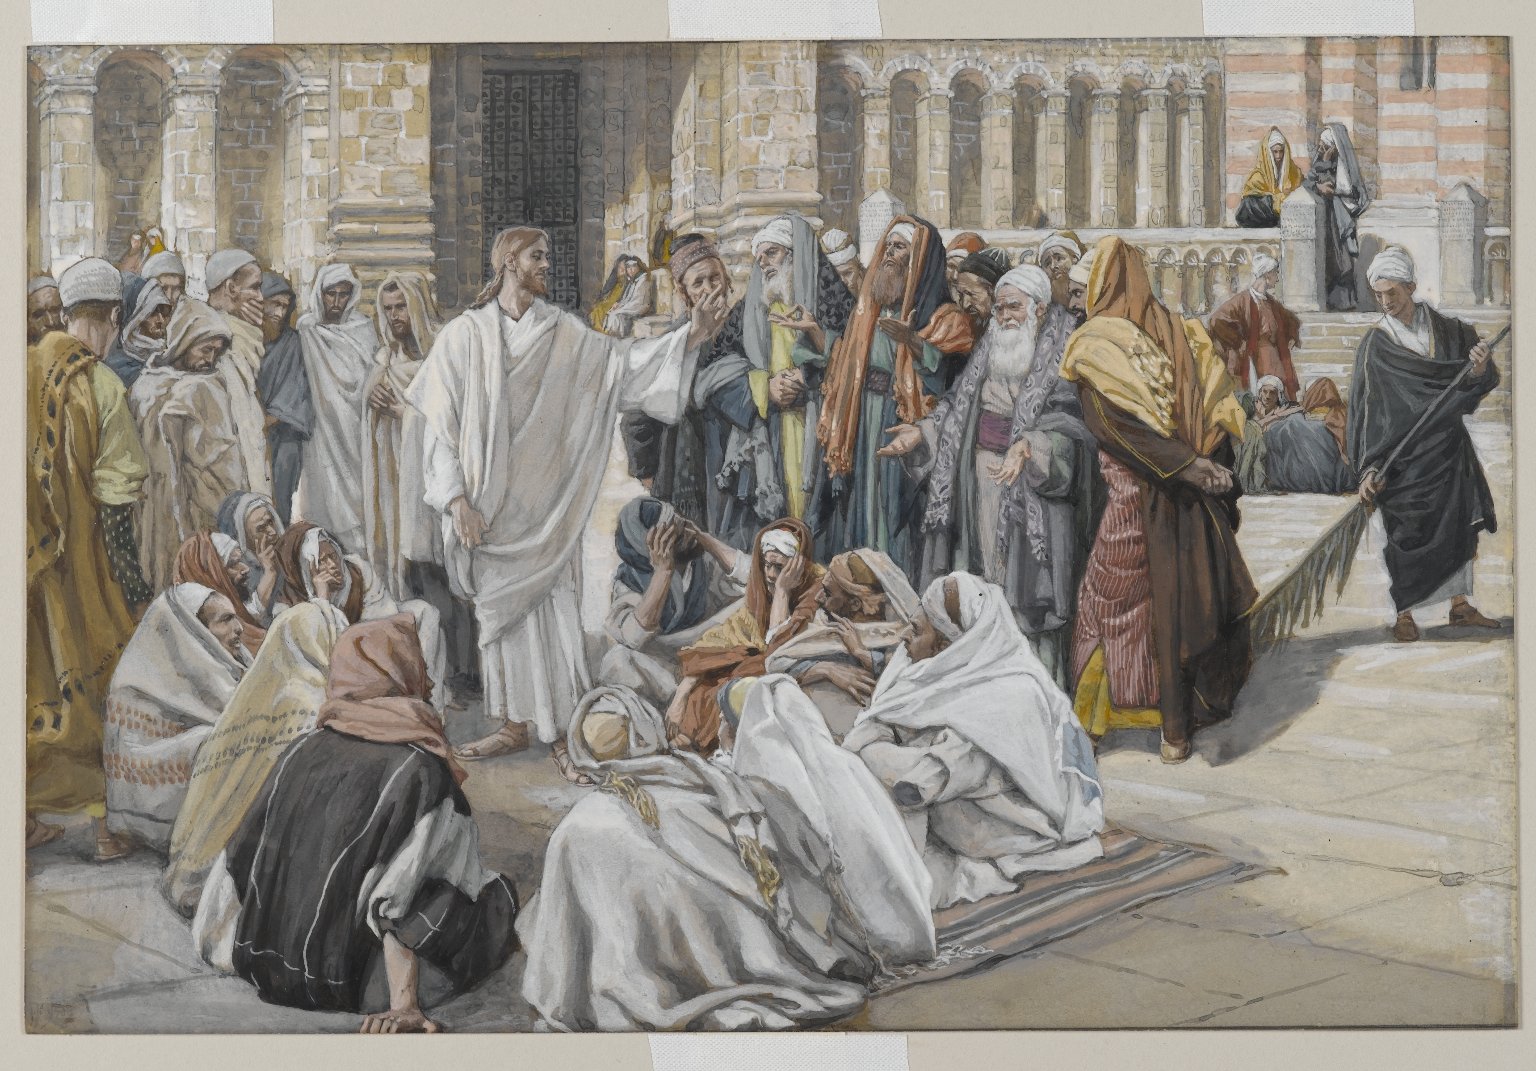 'The Pharisees Question Jesus' by James Tissot